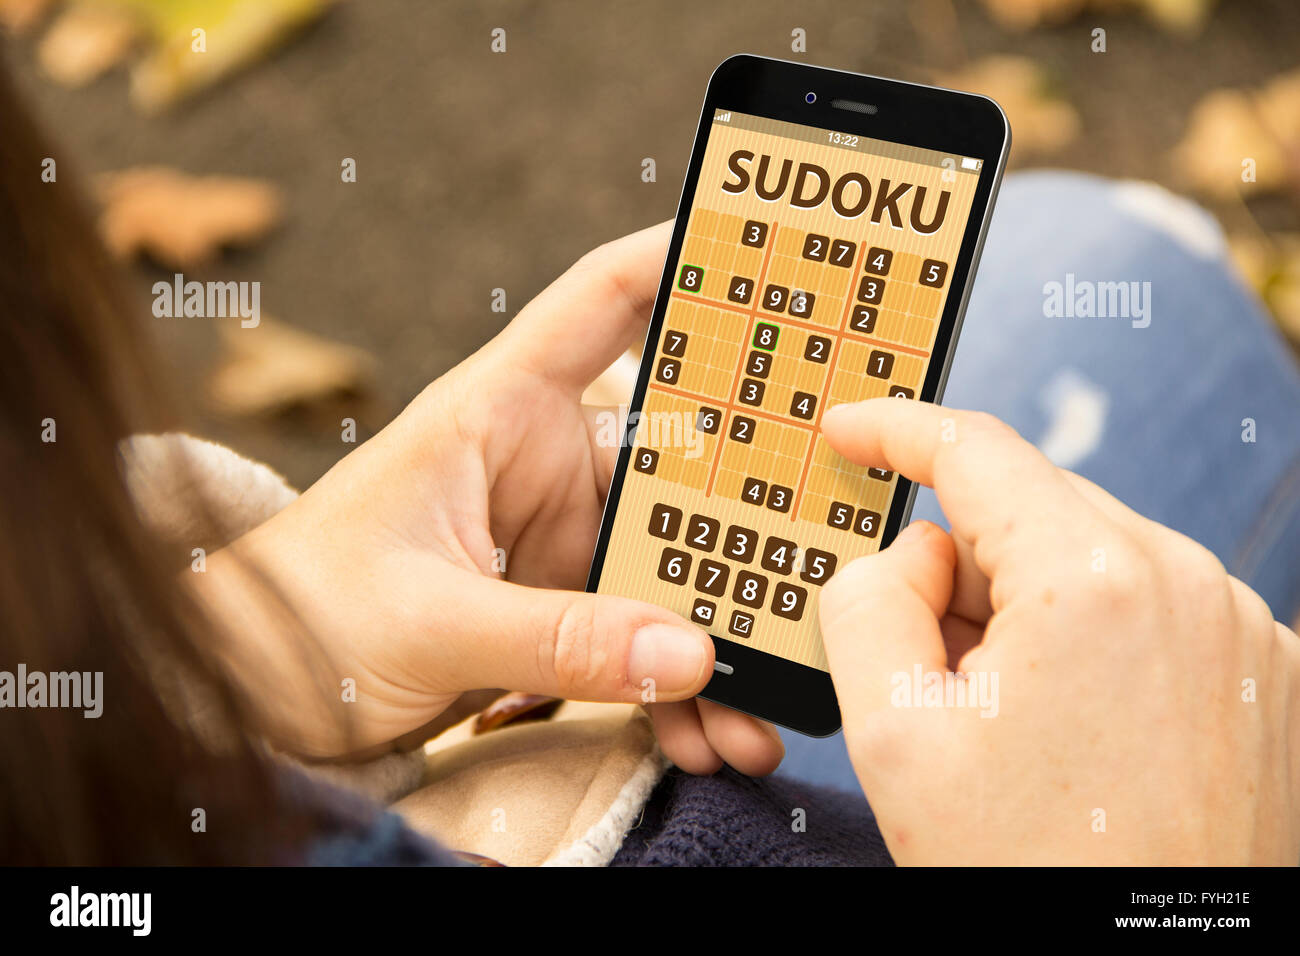 young woman with sudoku game application phone at the park Stock Photo